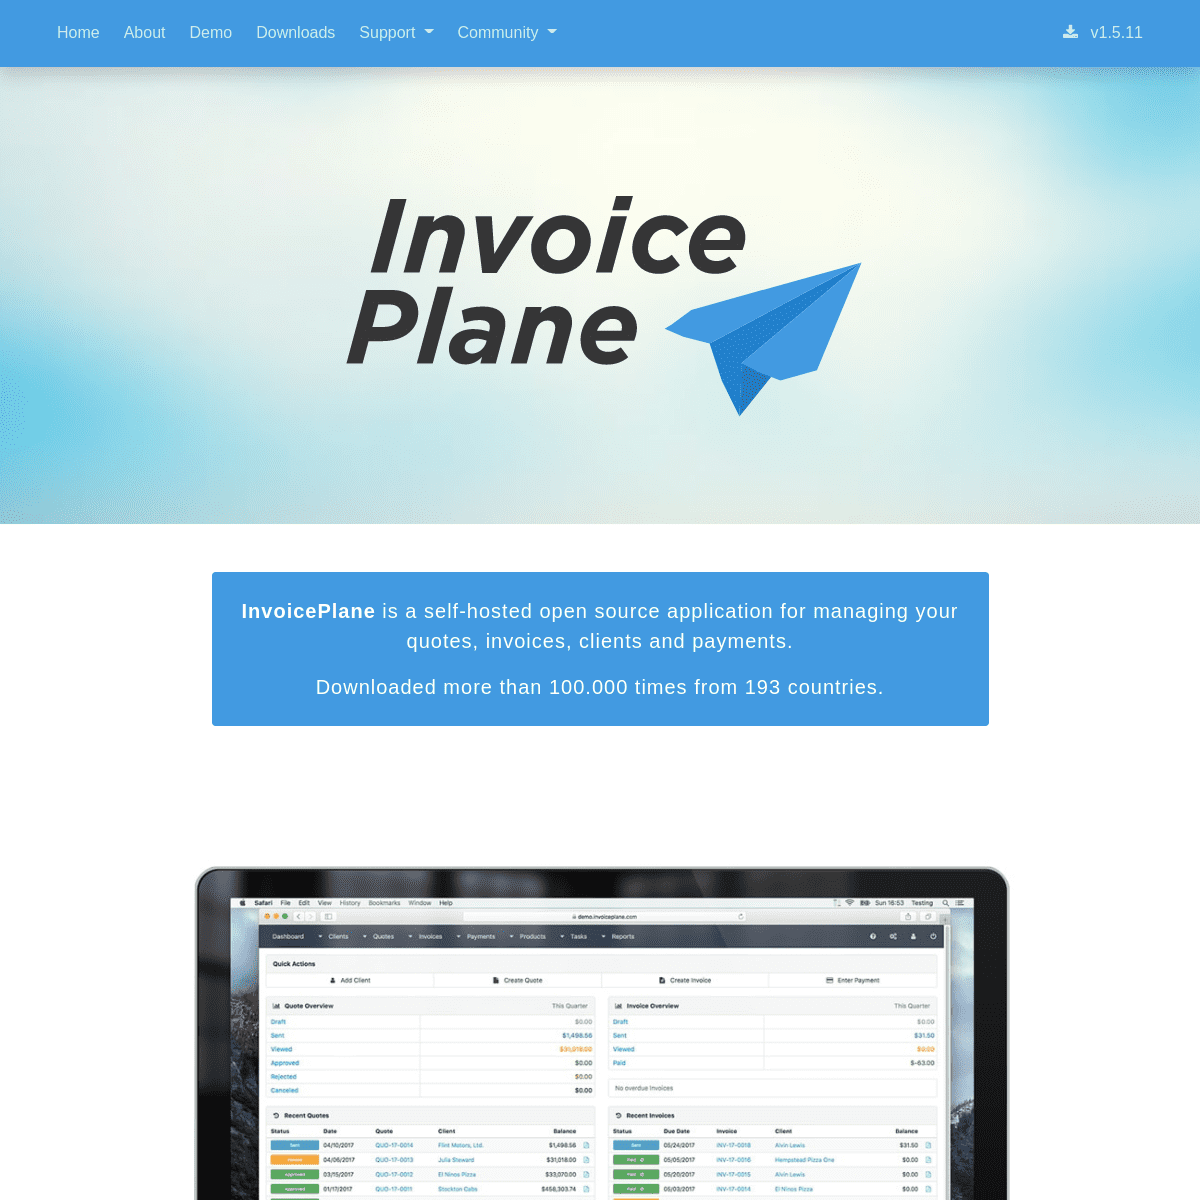 A complete backup of https://invoiceplane.com